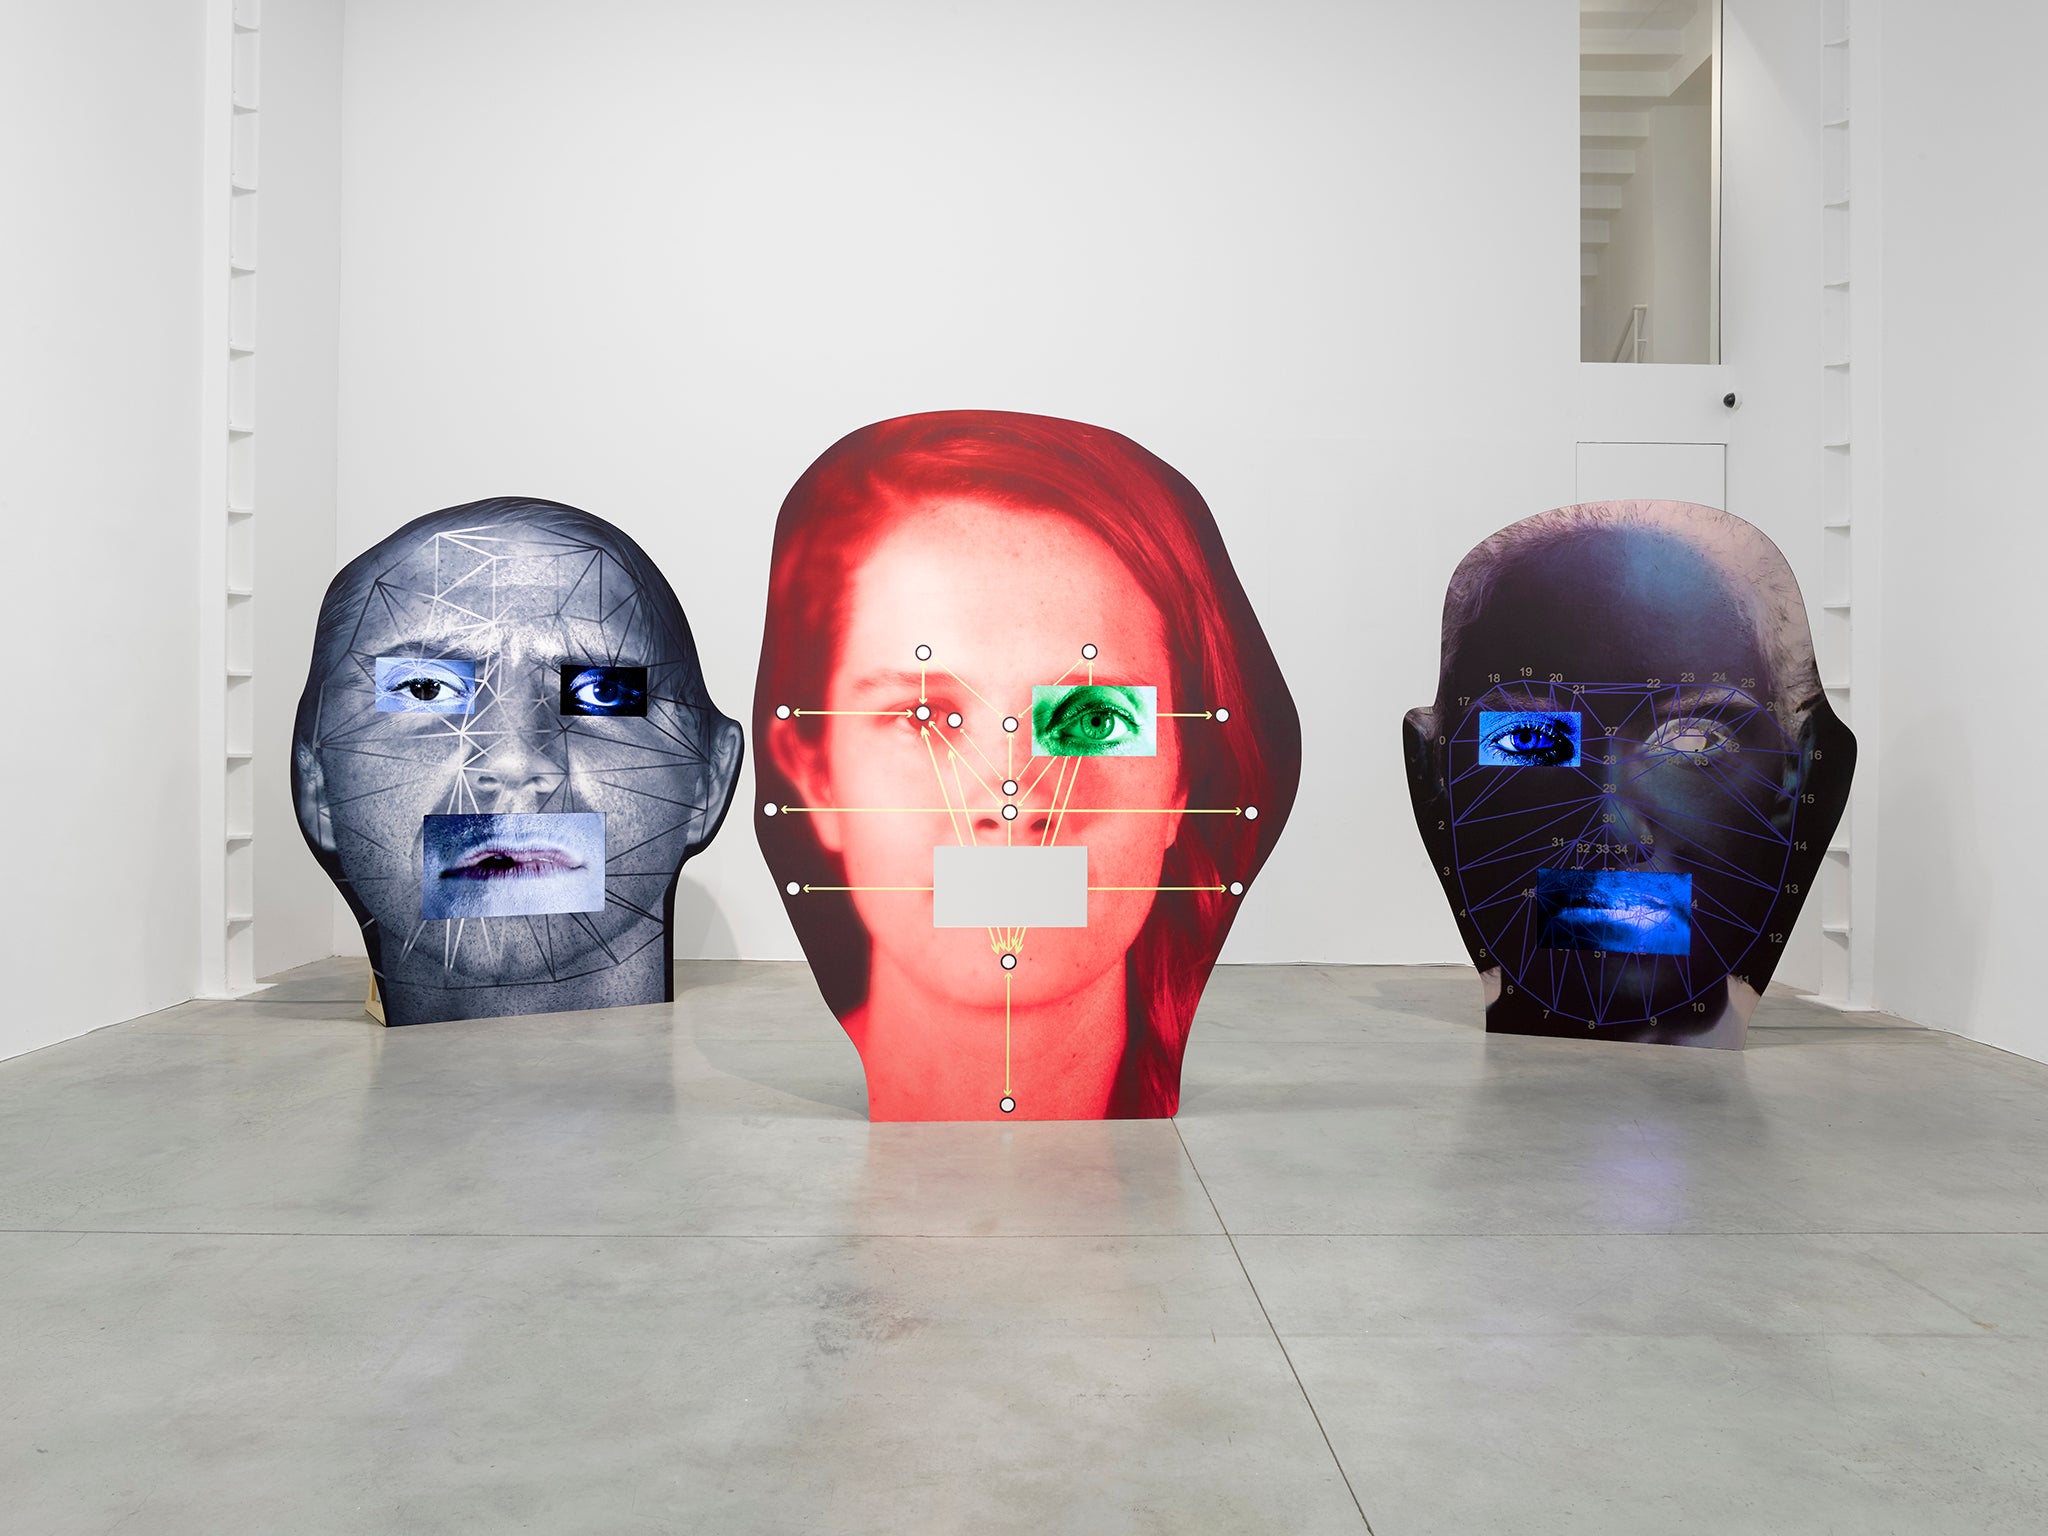 Turning heads: an installation view from the Tony Oursler show at the Lisson Gallery